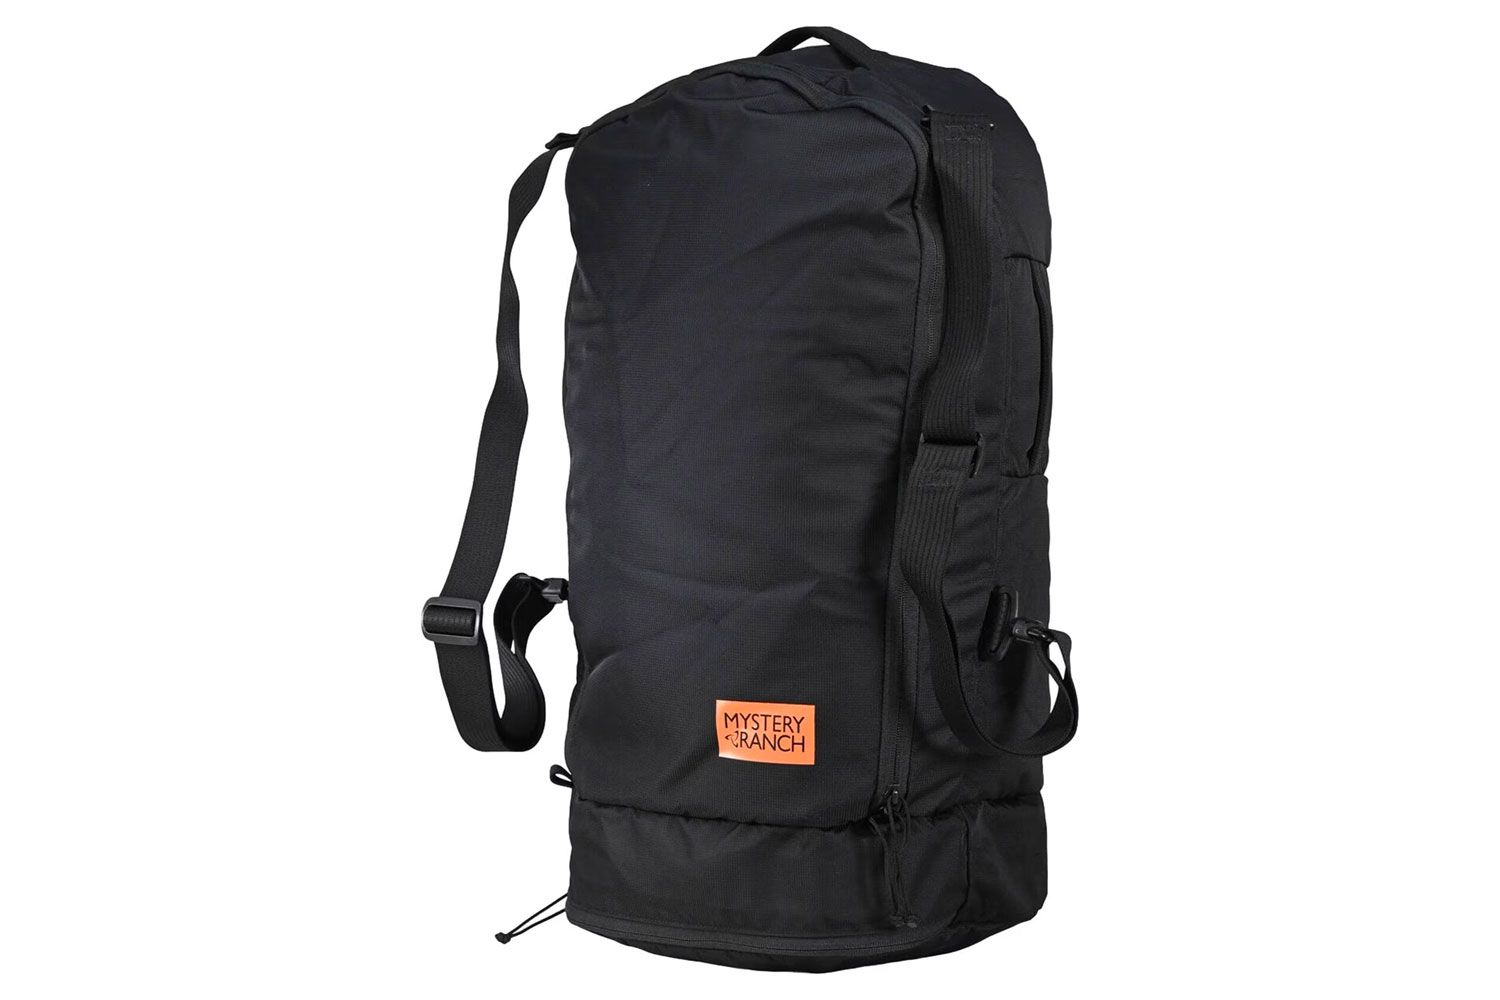 Backcountry Mystery Ranch Mission Stuffel 30L Bag